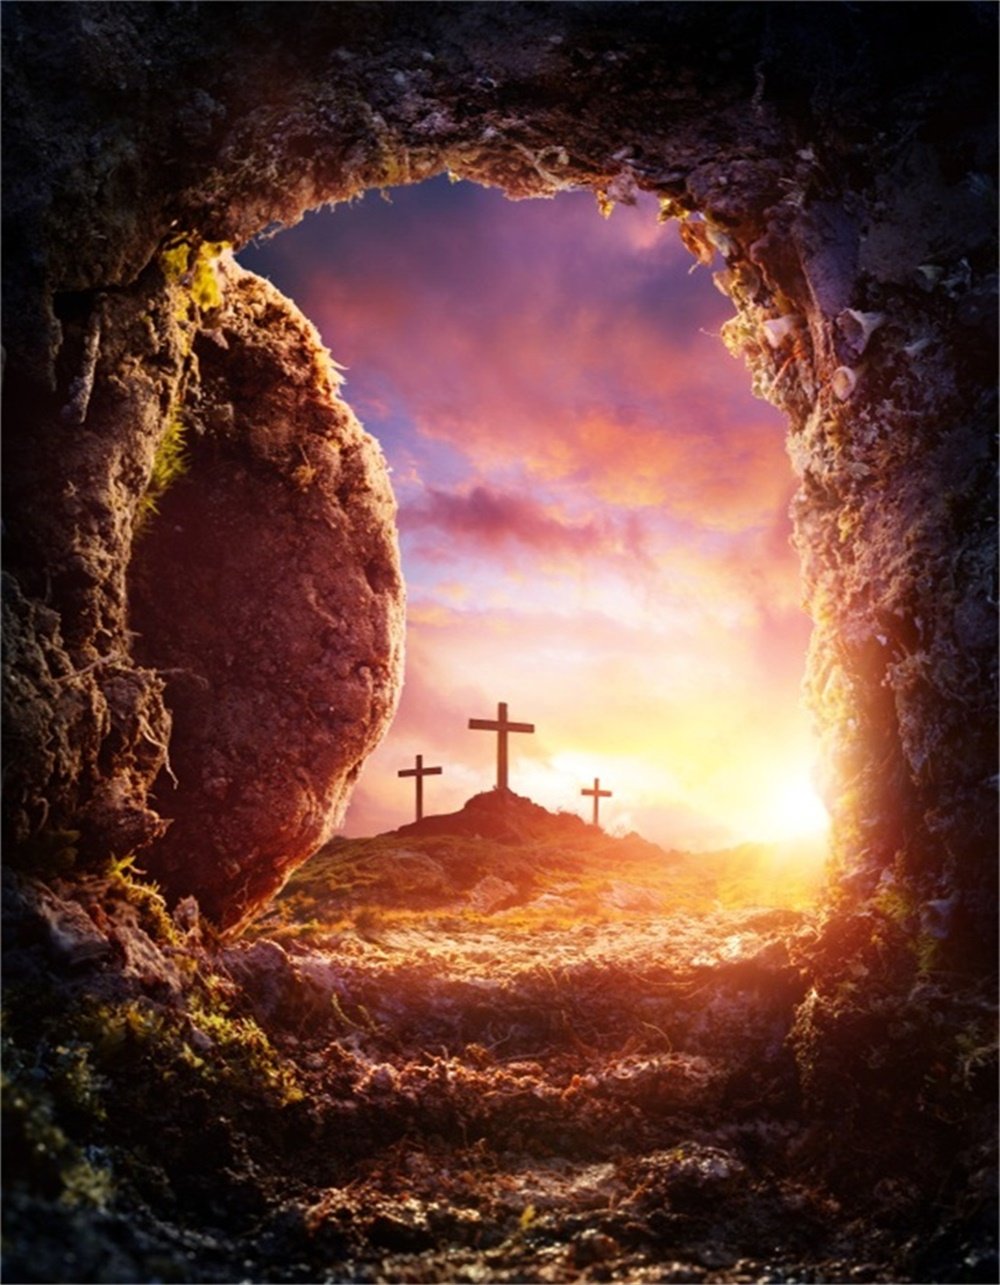 Amazon.com, AOFOTO 8x10ft Crucifixion Resurrection of Jesus Christ Backdrop Salvation Cross Photography Background Tomb Cave Sunrise Glimmers of Hope Photo Studio Props Bible Pray Christian Church Play Wallpaper